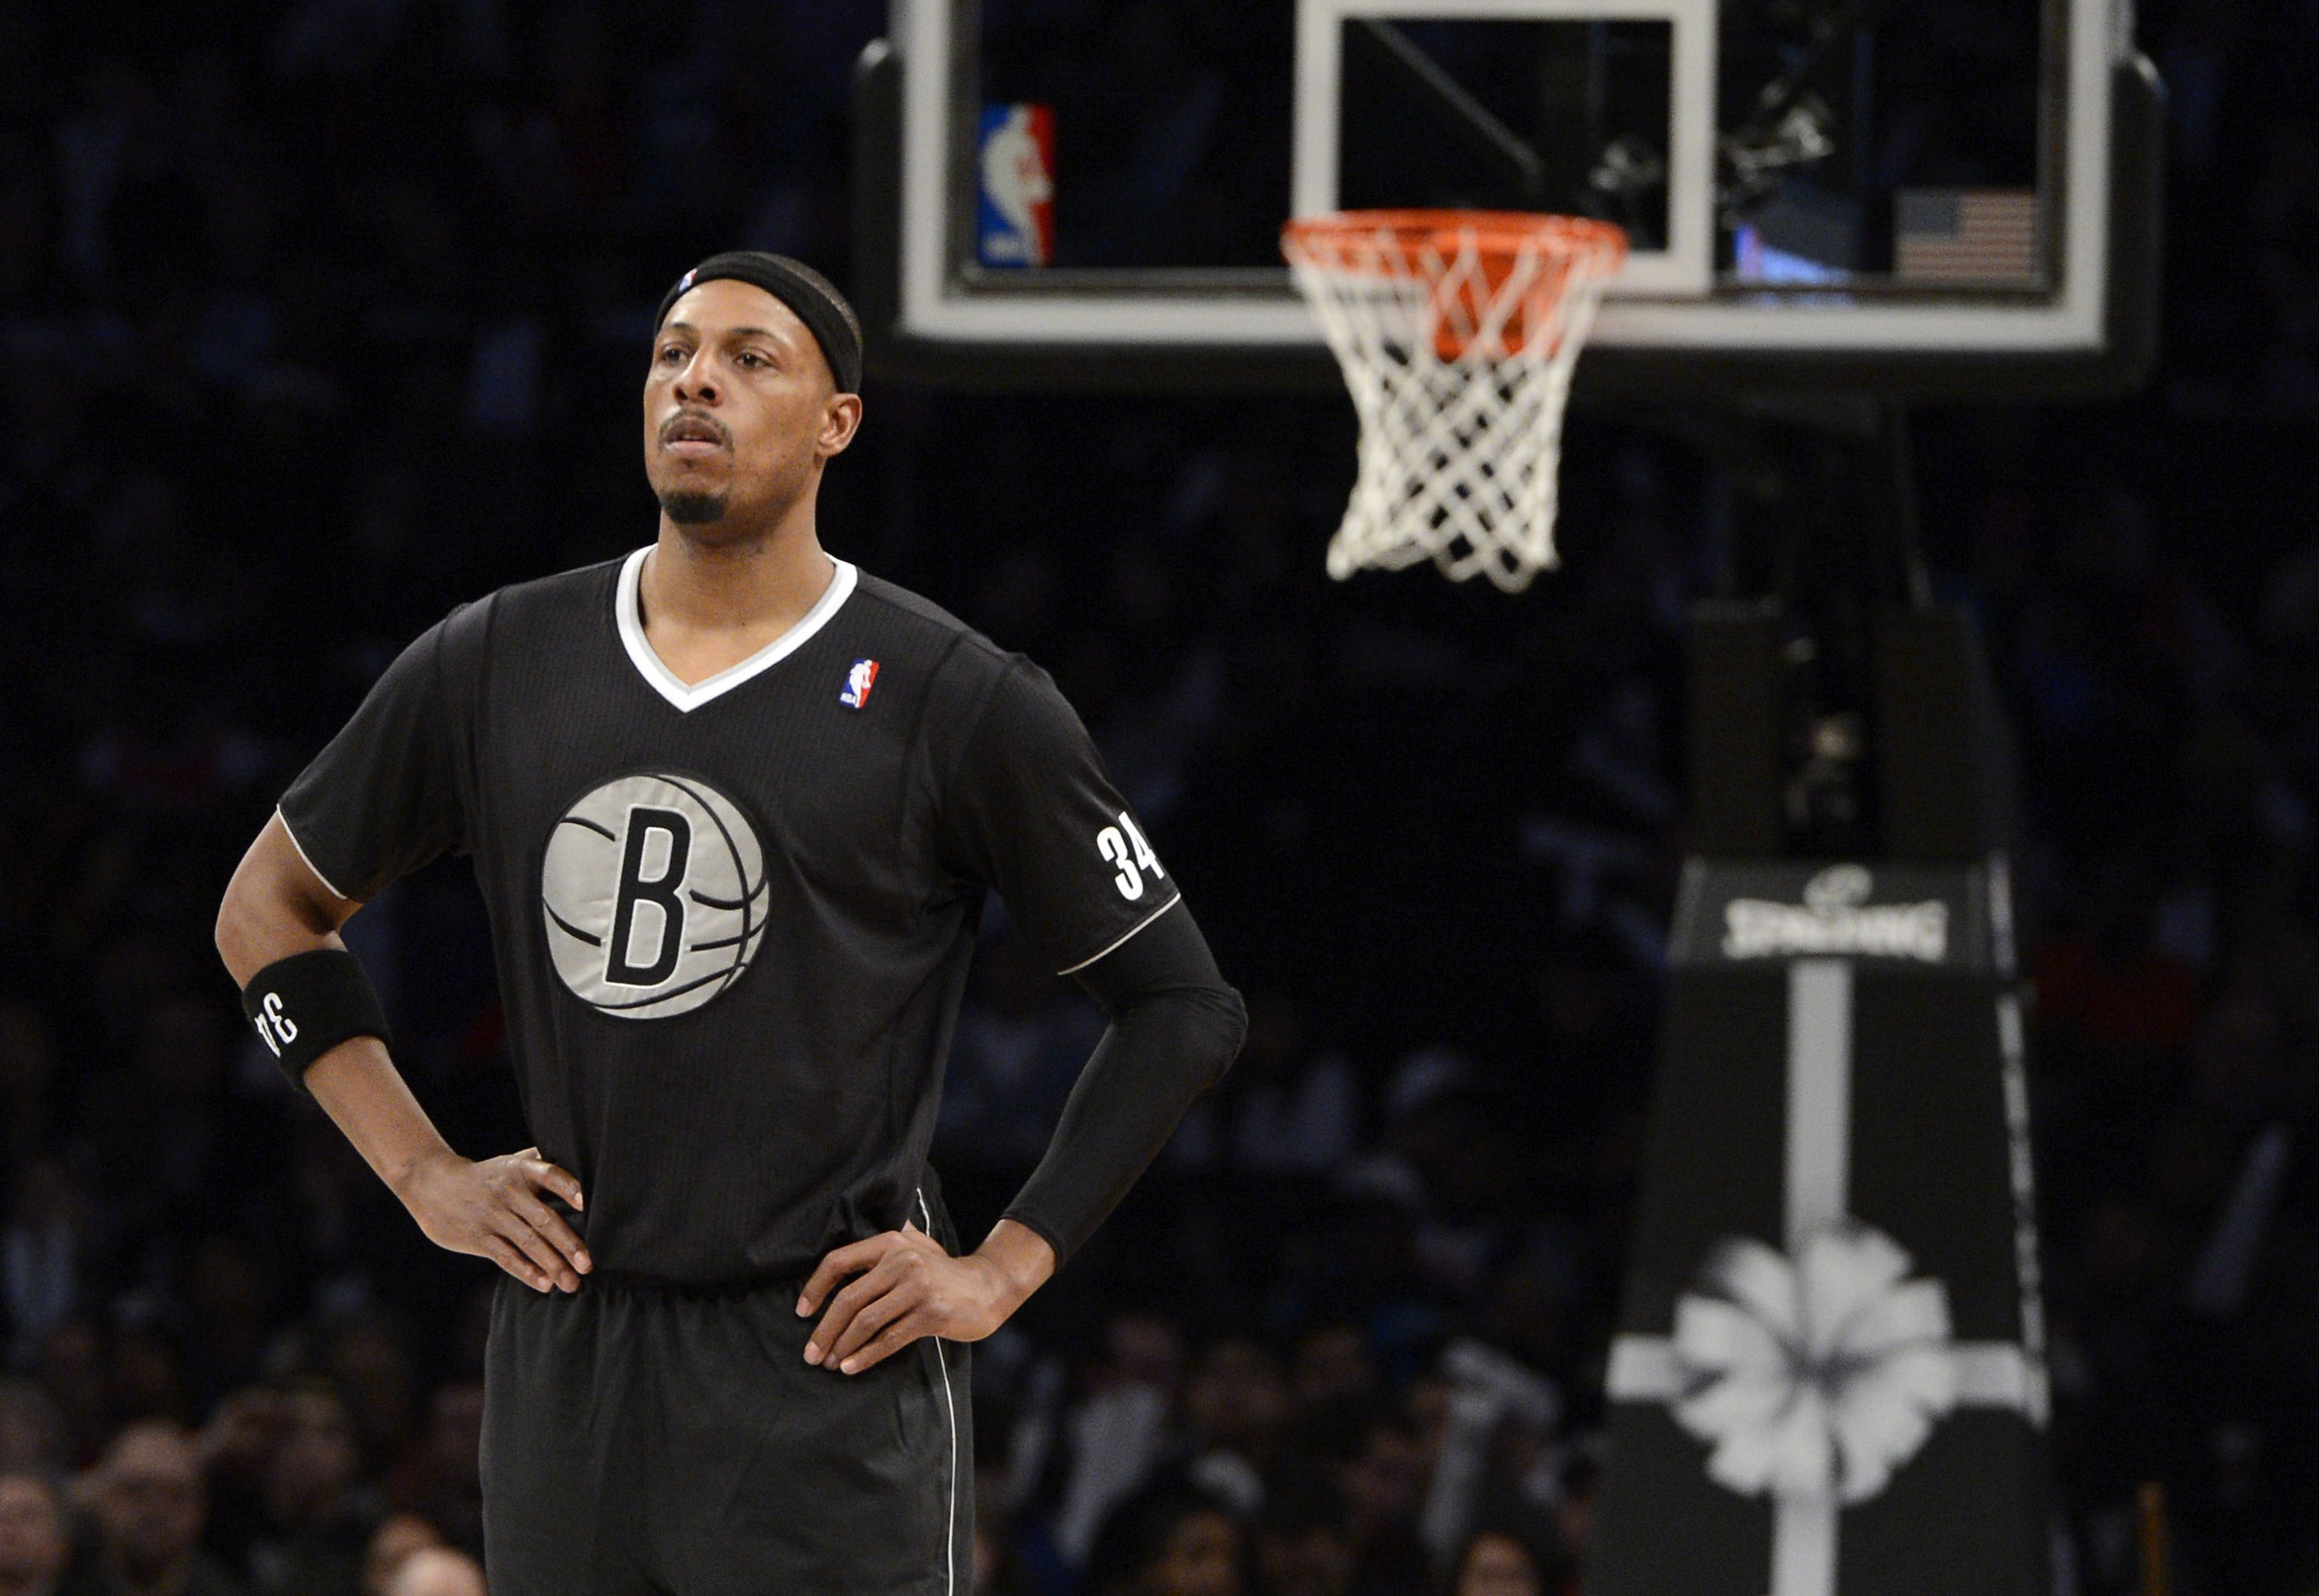 After Jay-Z debut, sale of Brooklyn Nets uniform goes live - NetsDaily